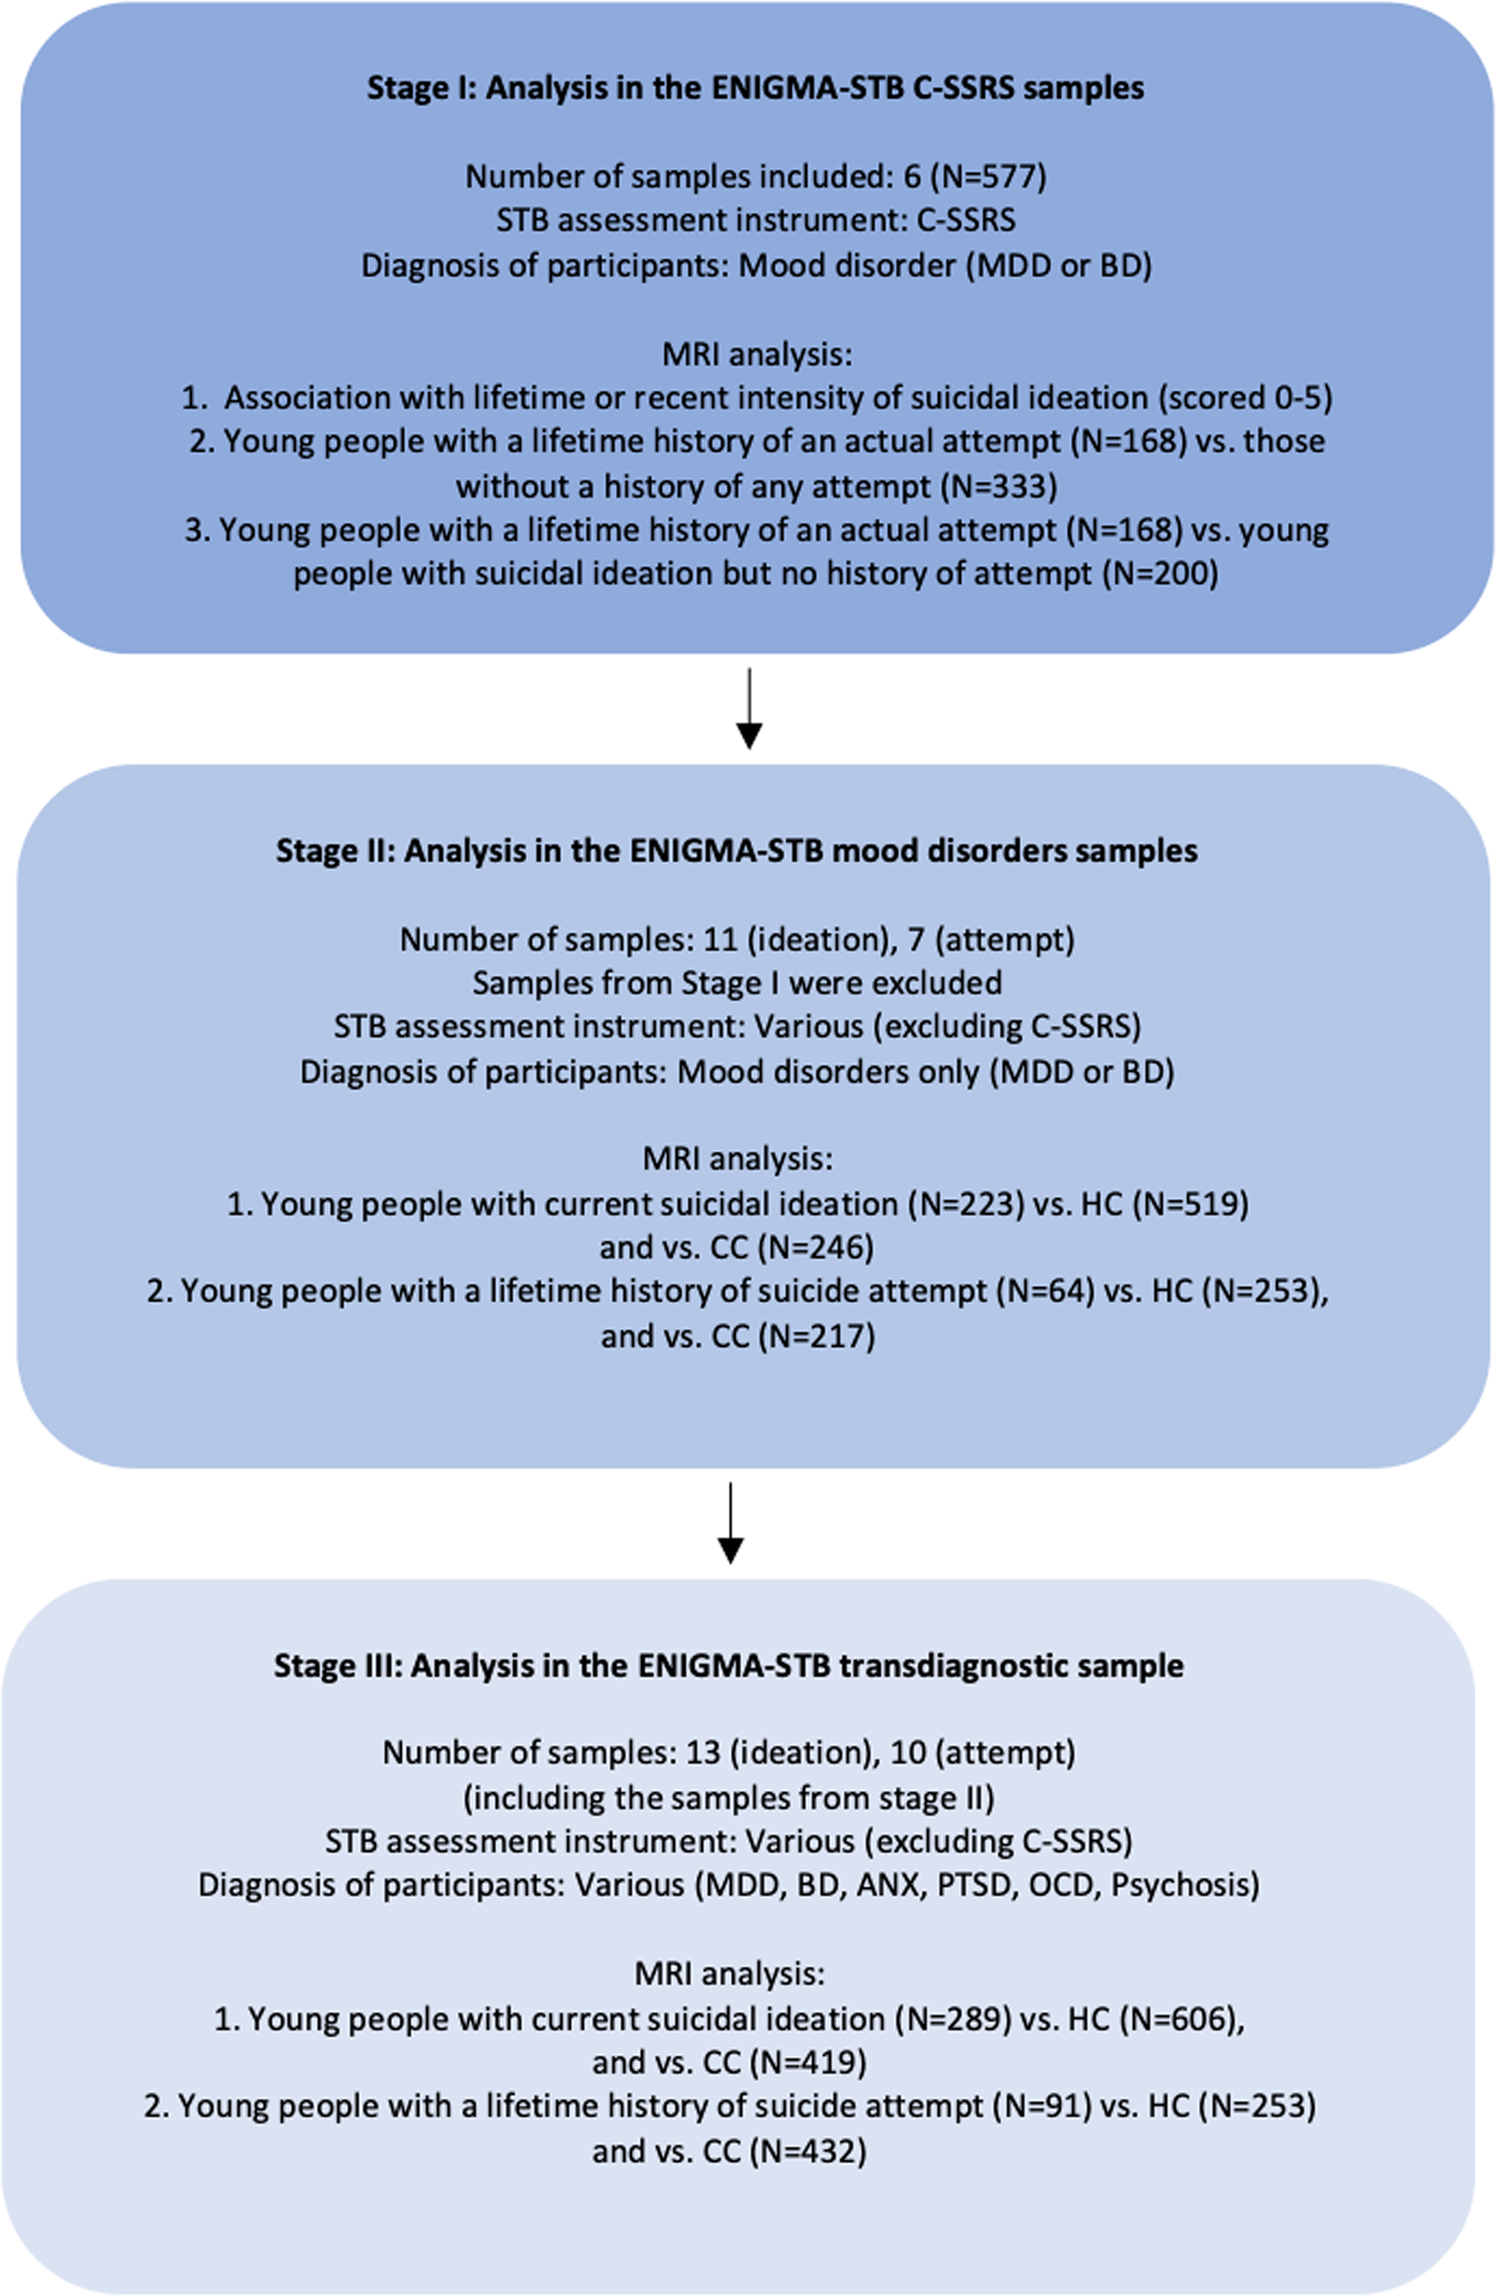 Structural brain alterations associated with suicidal thoughts and  behaviors in young people: results from 21 international studies from the  ENIGMA Suicidal Thoughts and Behaviours consortium | Molecular Psychiatry